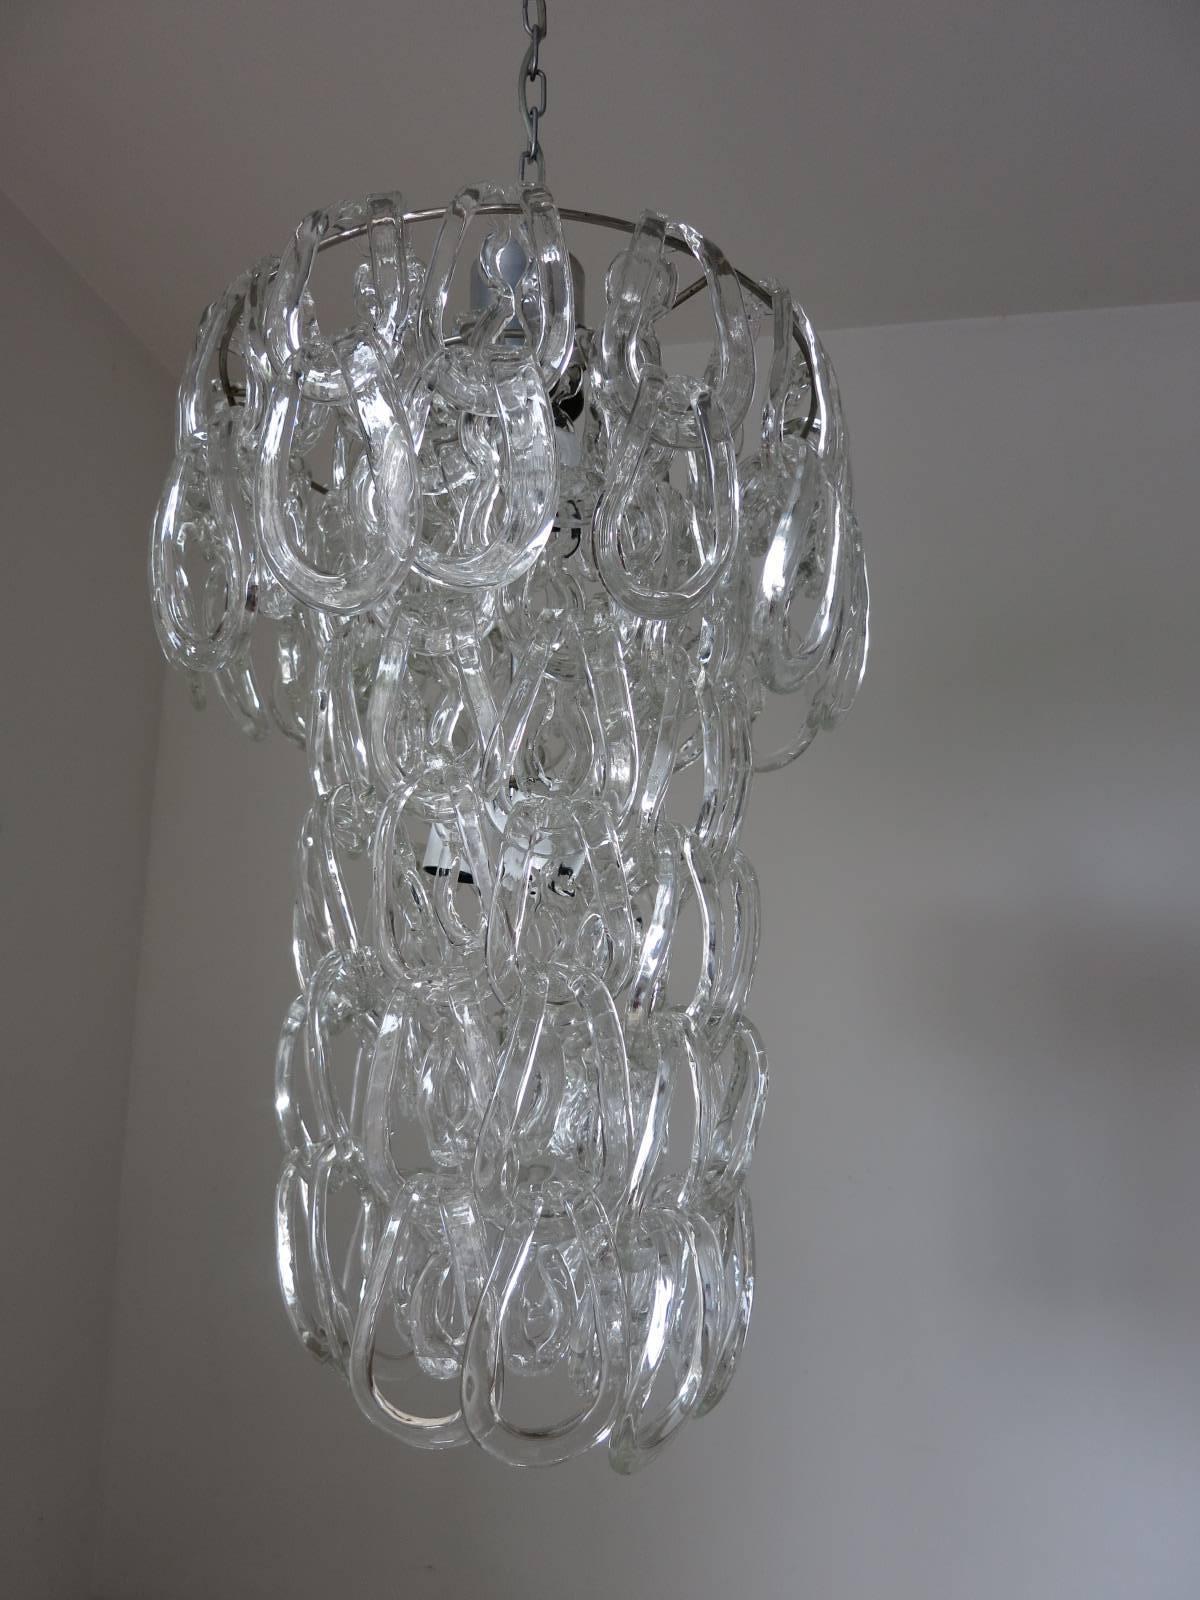 Vintage Italian chandelier with hand blown clear Murano glass links, elegantly fitted on chrome frame and descending into a glass chain / designed by Angelo Mangiarotti for Vistosi circa 1960’s / made in Italy.